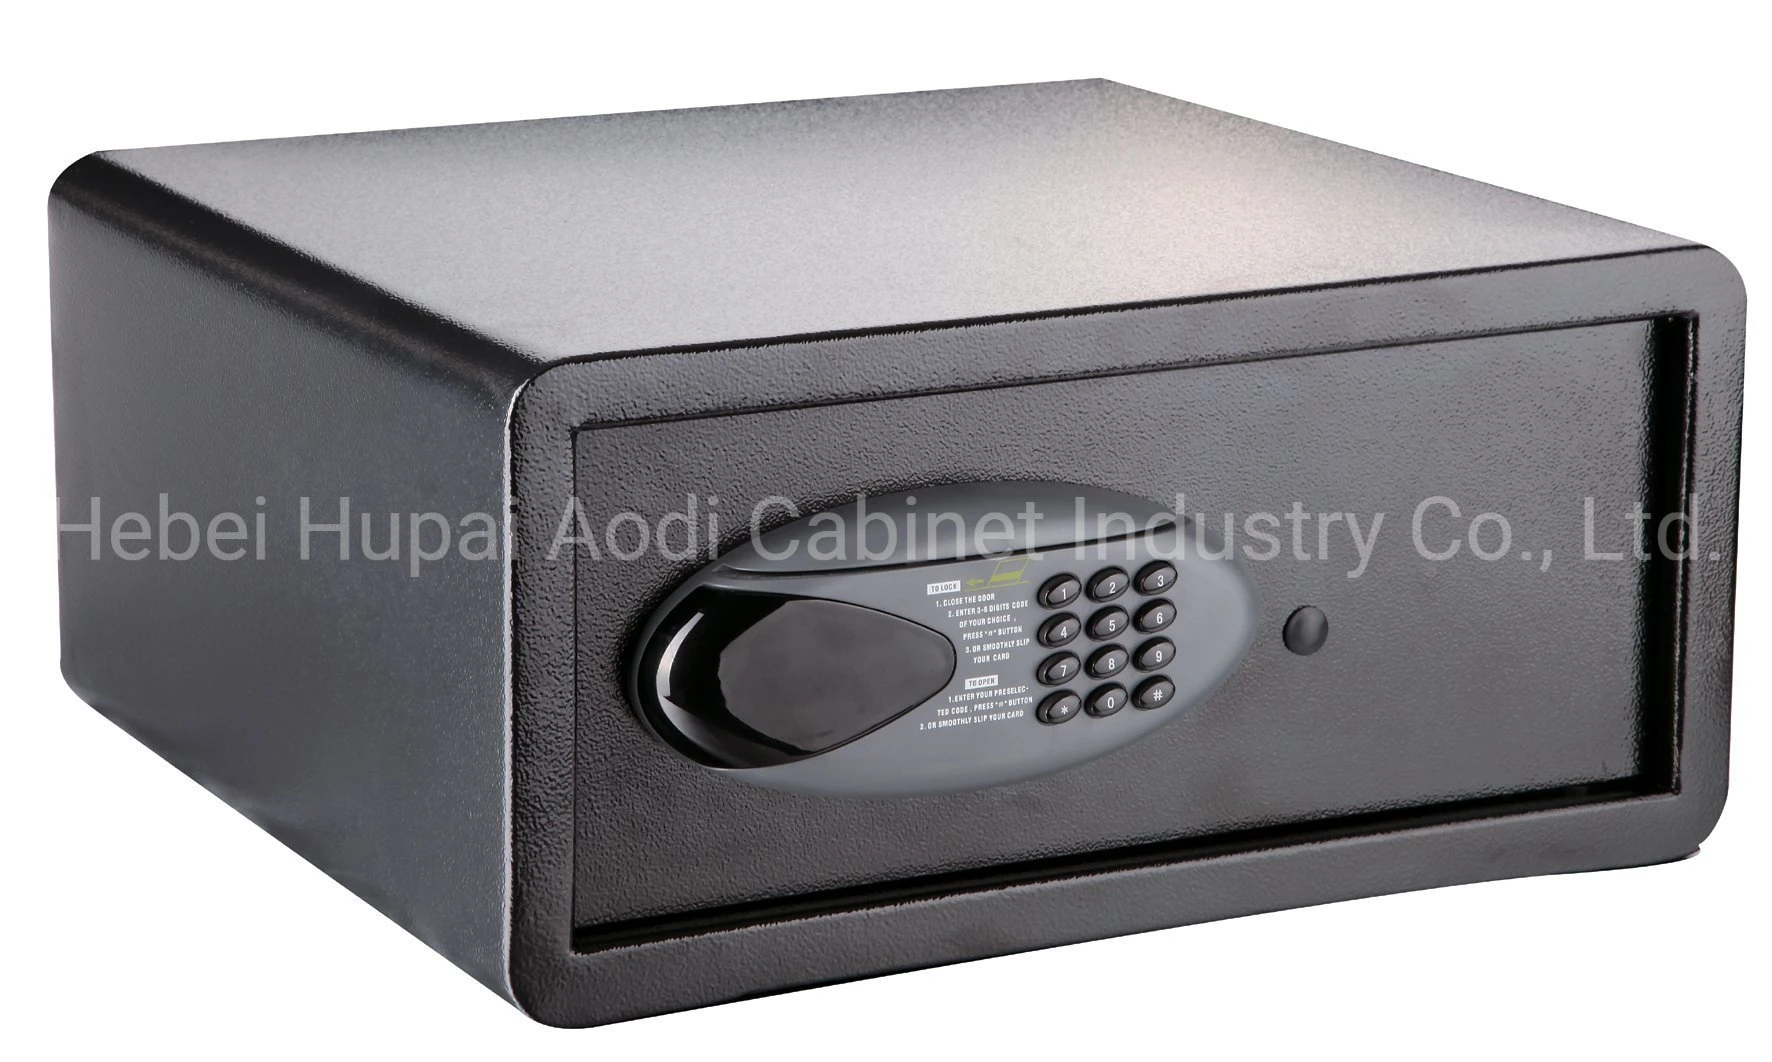 Anti-Theft Guest Room Electronic Hotel Safe Deposit Box